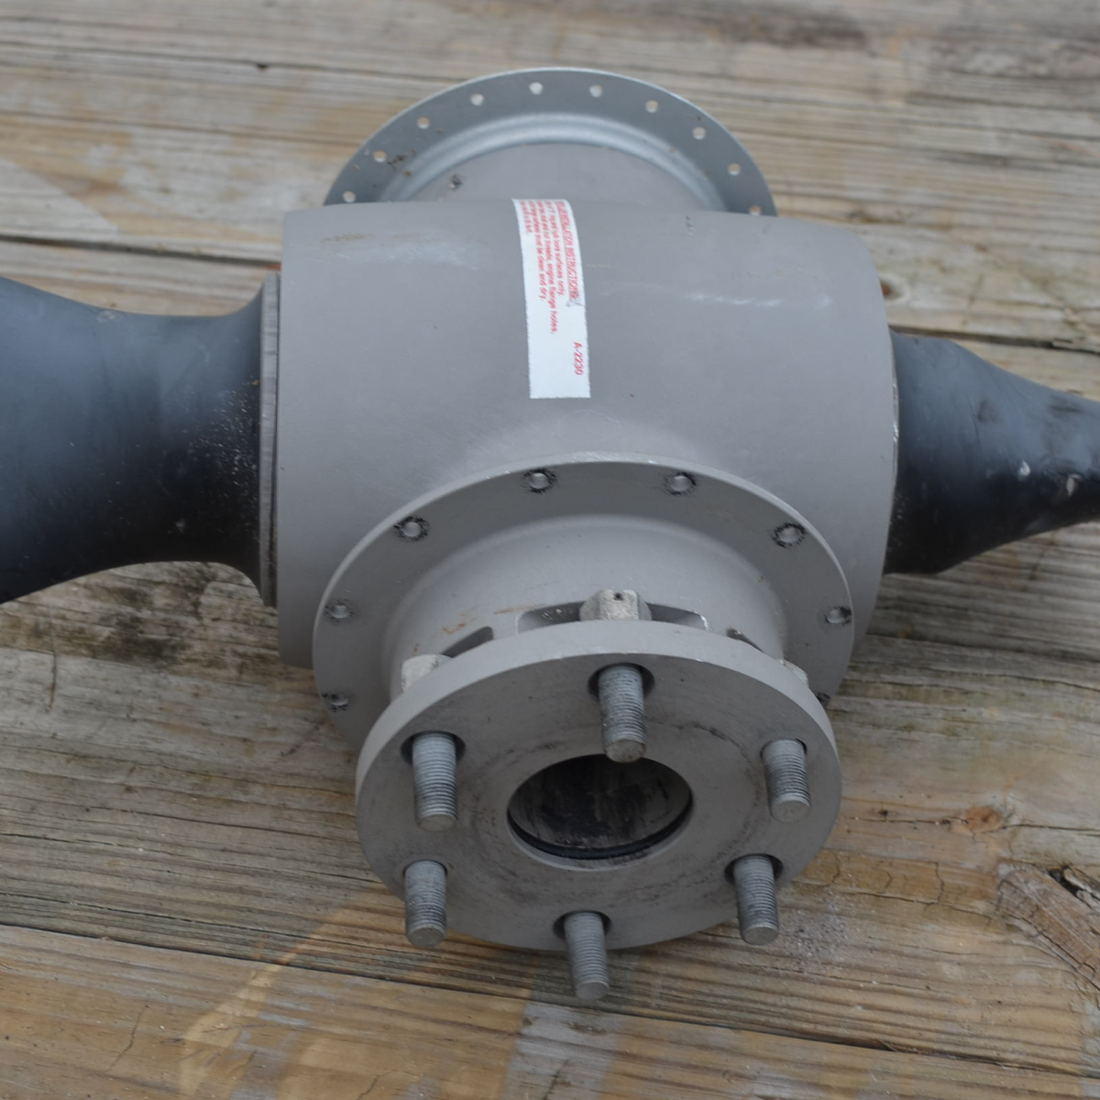 Used aircraft parts for sale, B2D34C220-B Cessna 172RG MCCAULEY - 2 BLADE PROPELLER (HUB PARTS ONLY SEE DETAILS)